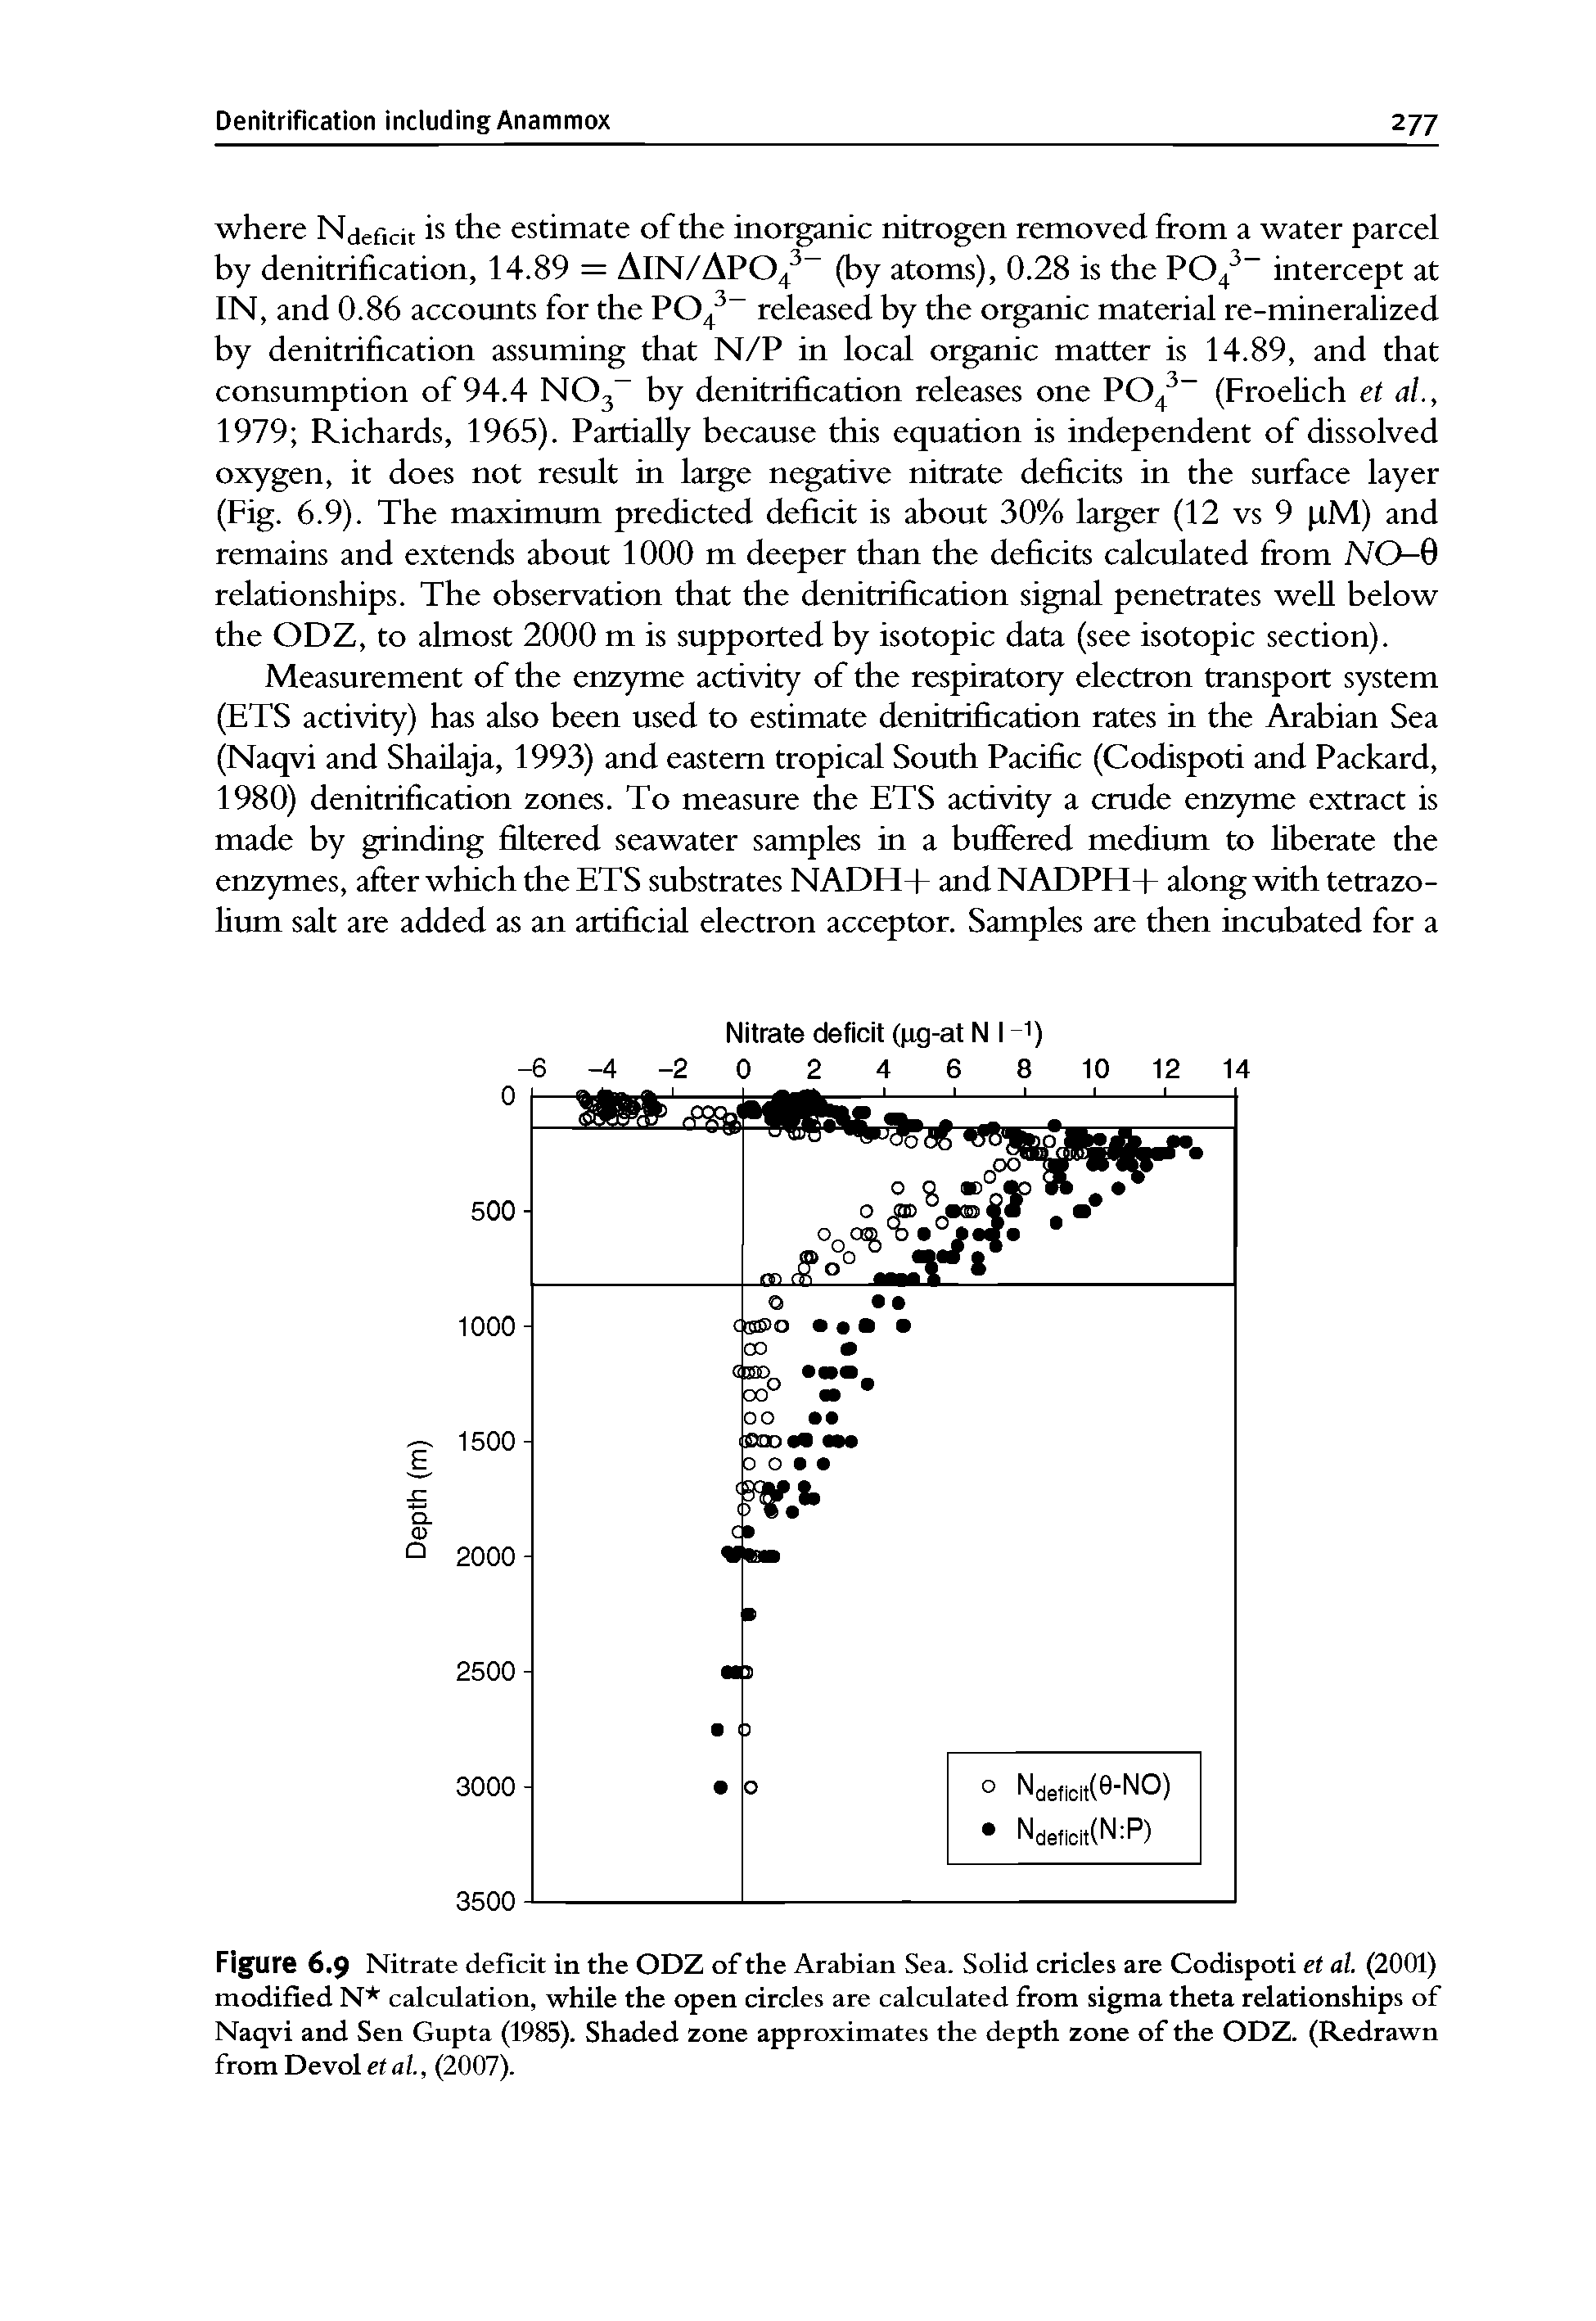 Figure 6.9 Nitrate deficit in the ODZ of the Arabian Sea. Soiid cricles are Codispoti et al. (2001) modified N calculation, while the open circles are calculated from sigma theta relationships of Naqvi and Sen Gupta (1985). Shaded zone approximates the depth zone of the ODZ. (Redrawn from Devol etal, (2007).